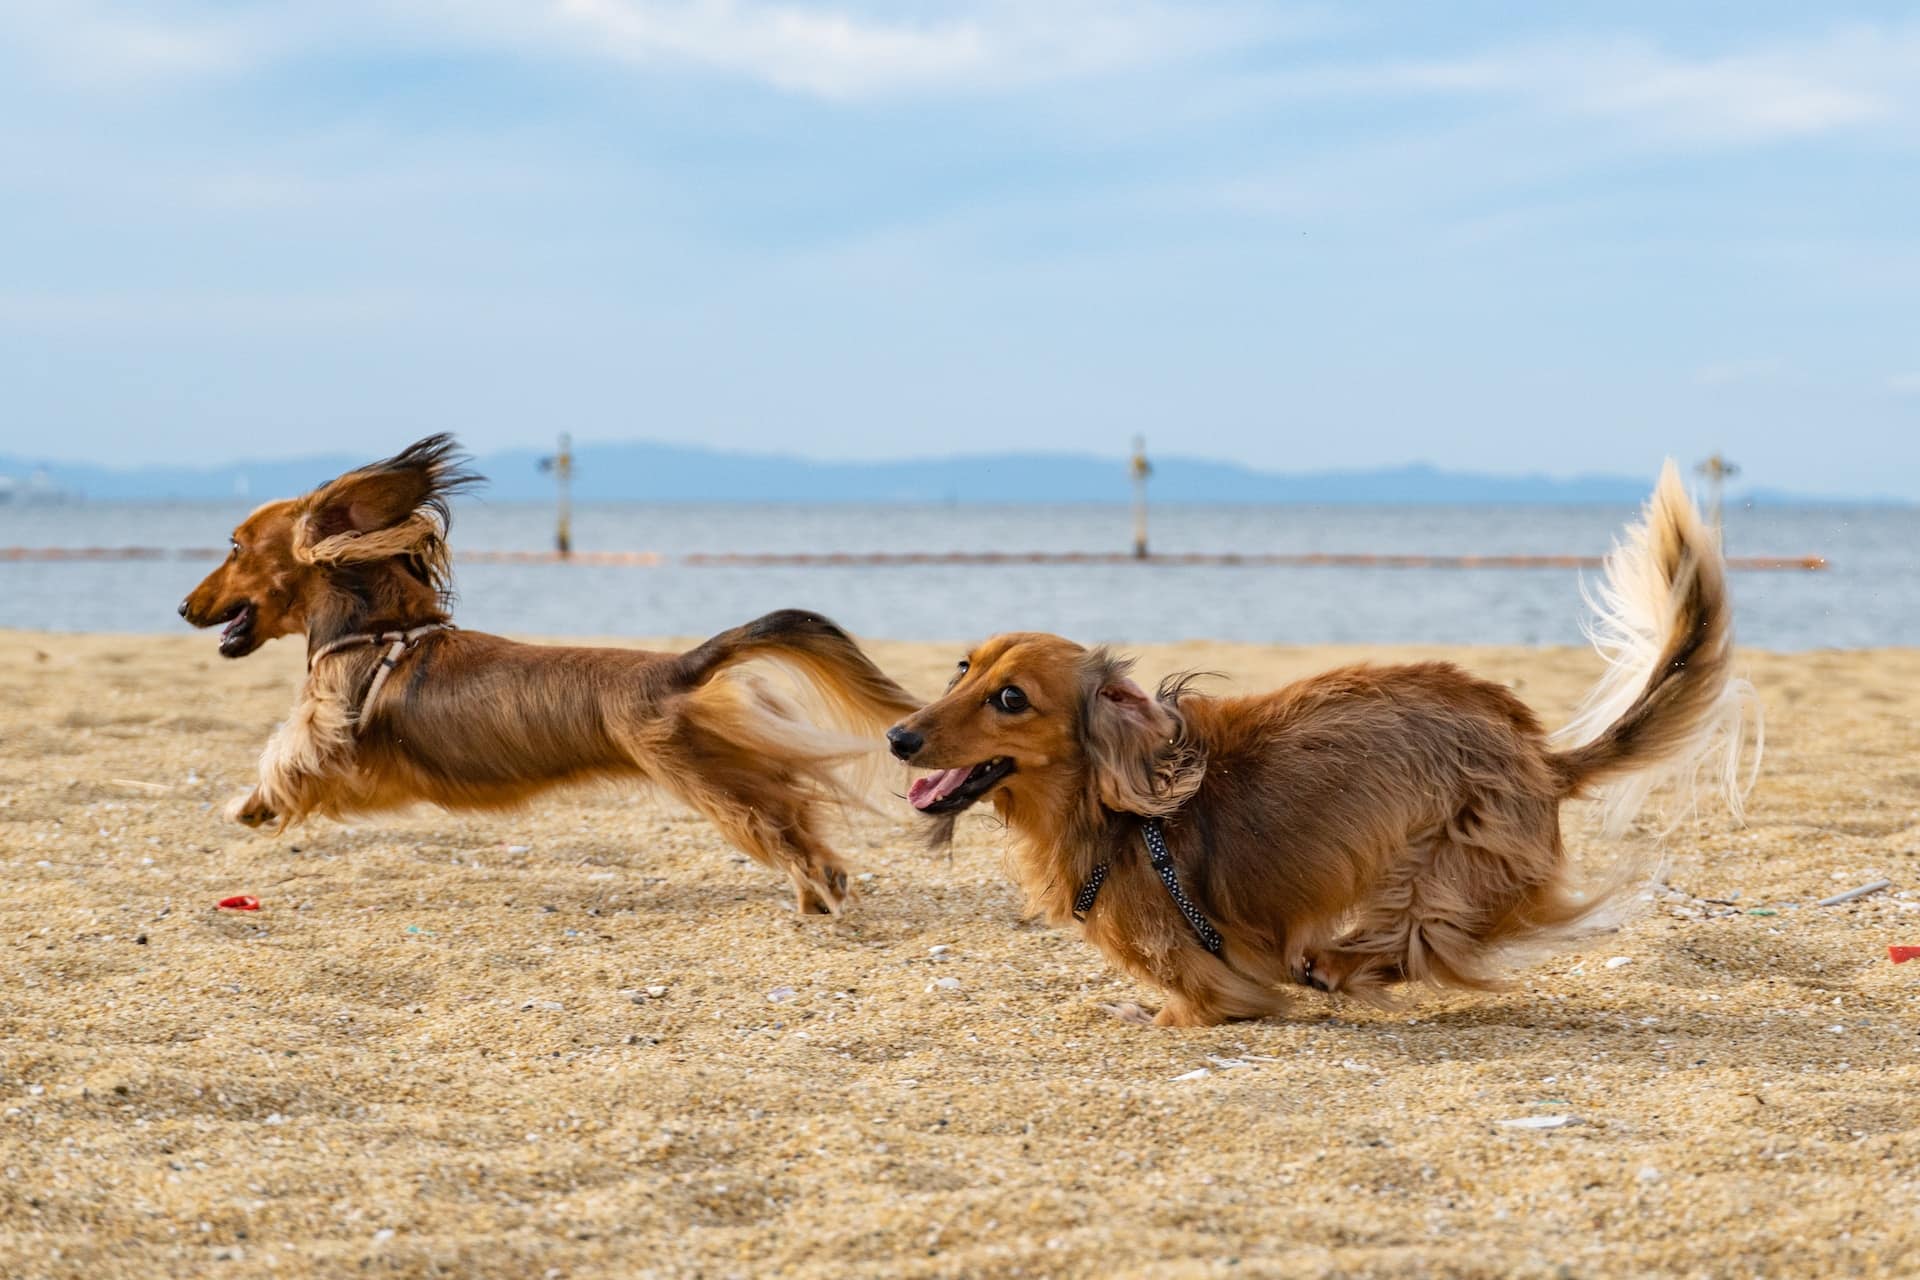 Two dachshunds running and playing on a dog friendly Orange County beach, California, USA